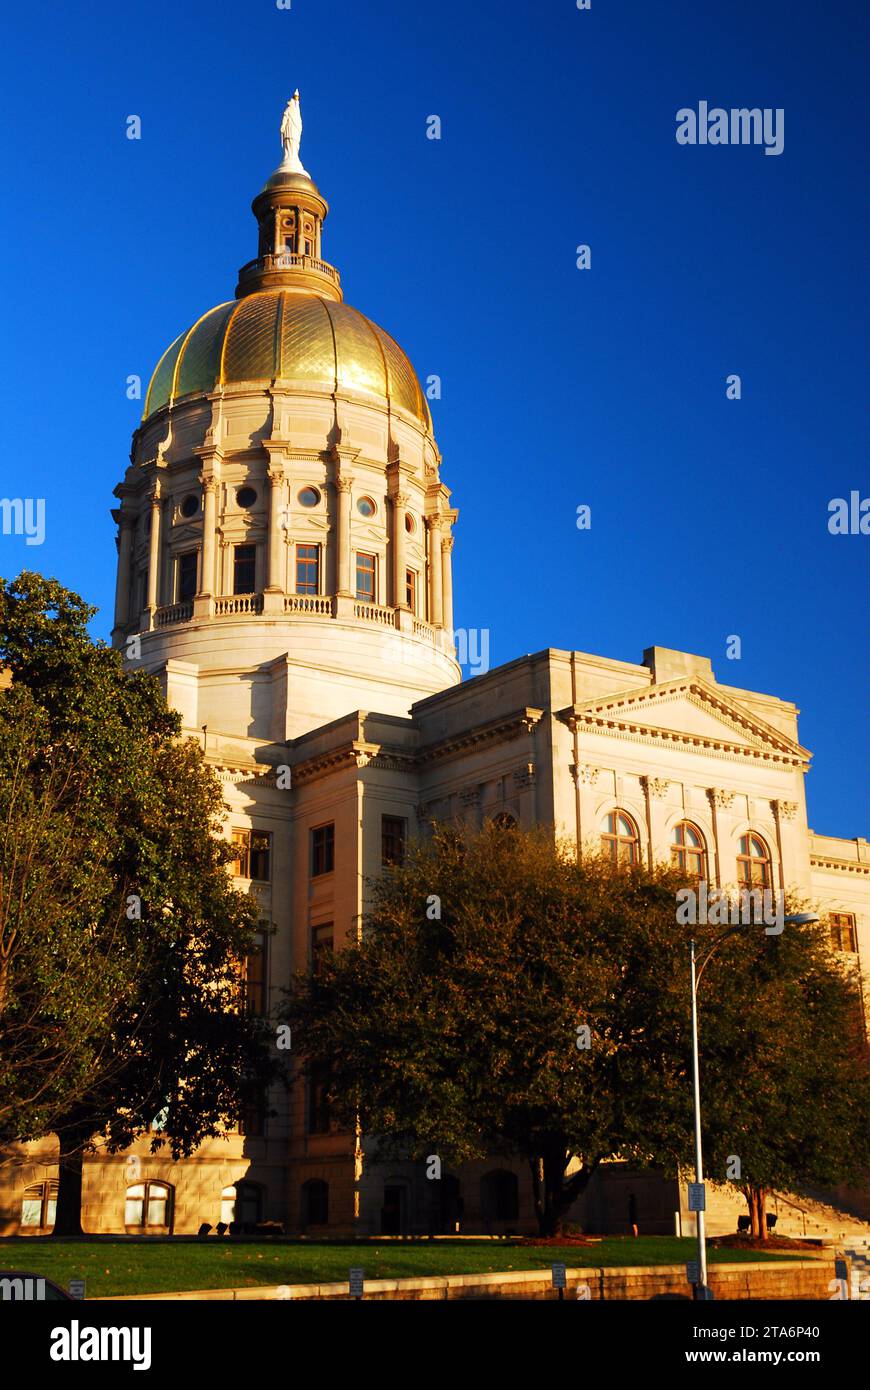 The gold dome of the Georgia State Capitol, home to the politics and political life of the state government, rises over the tree line Stock Photo